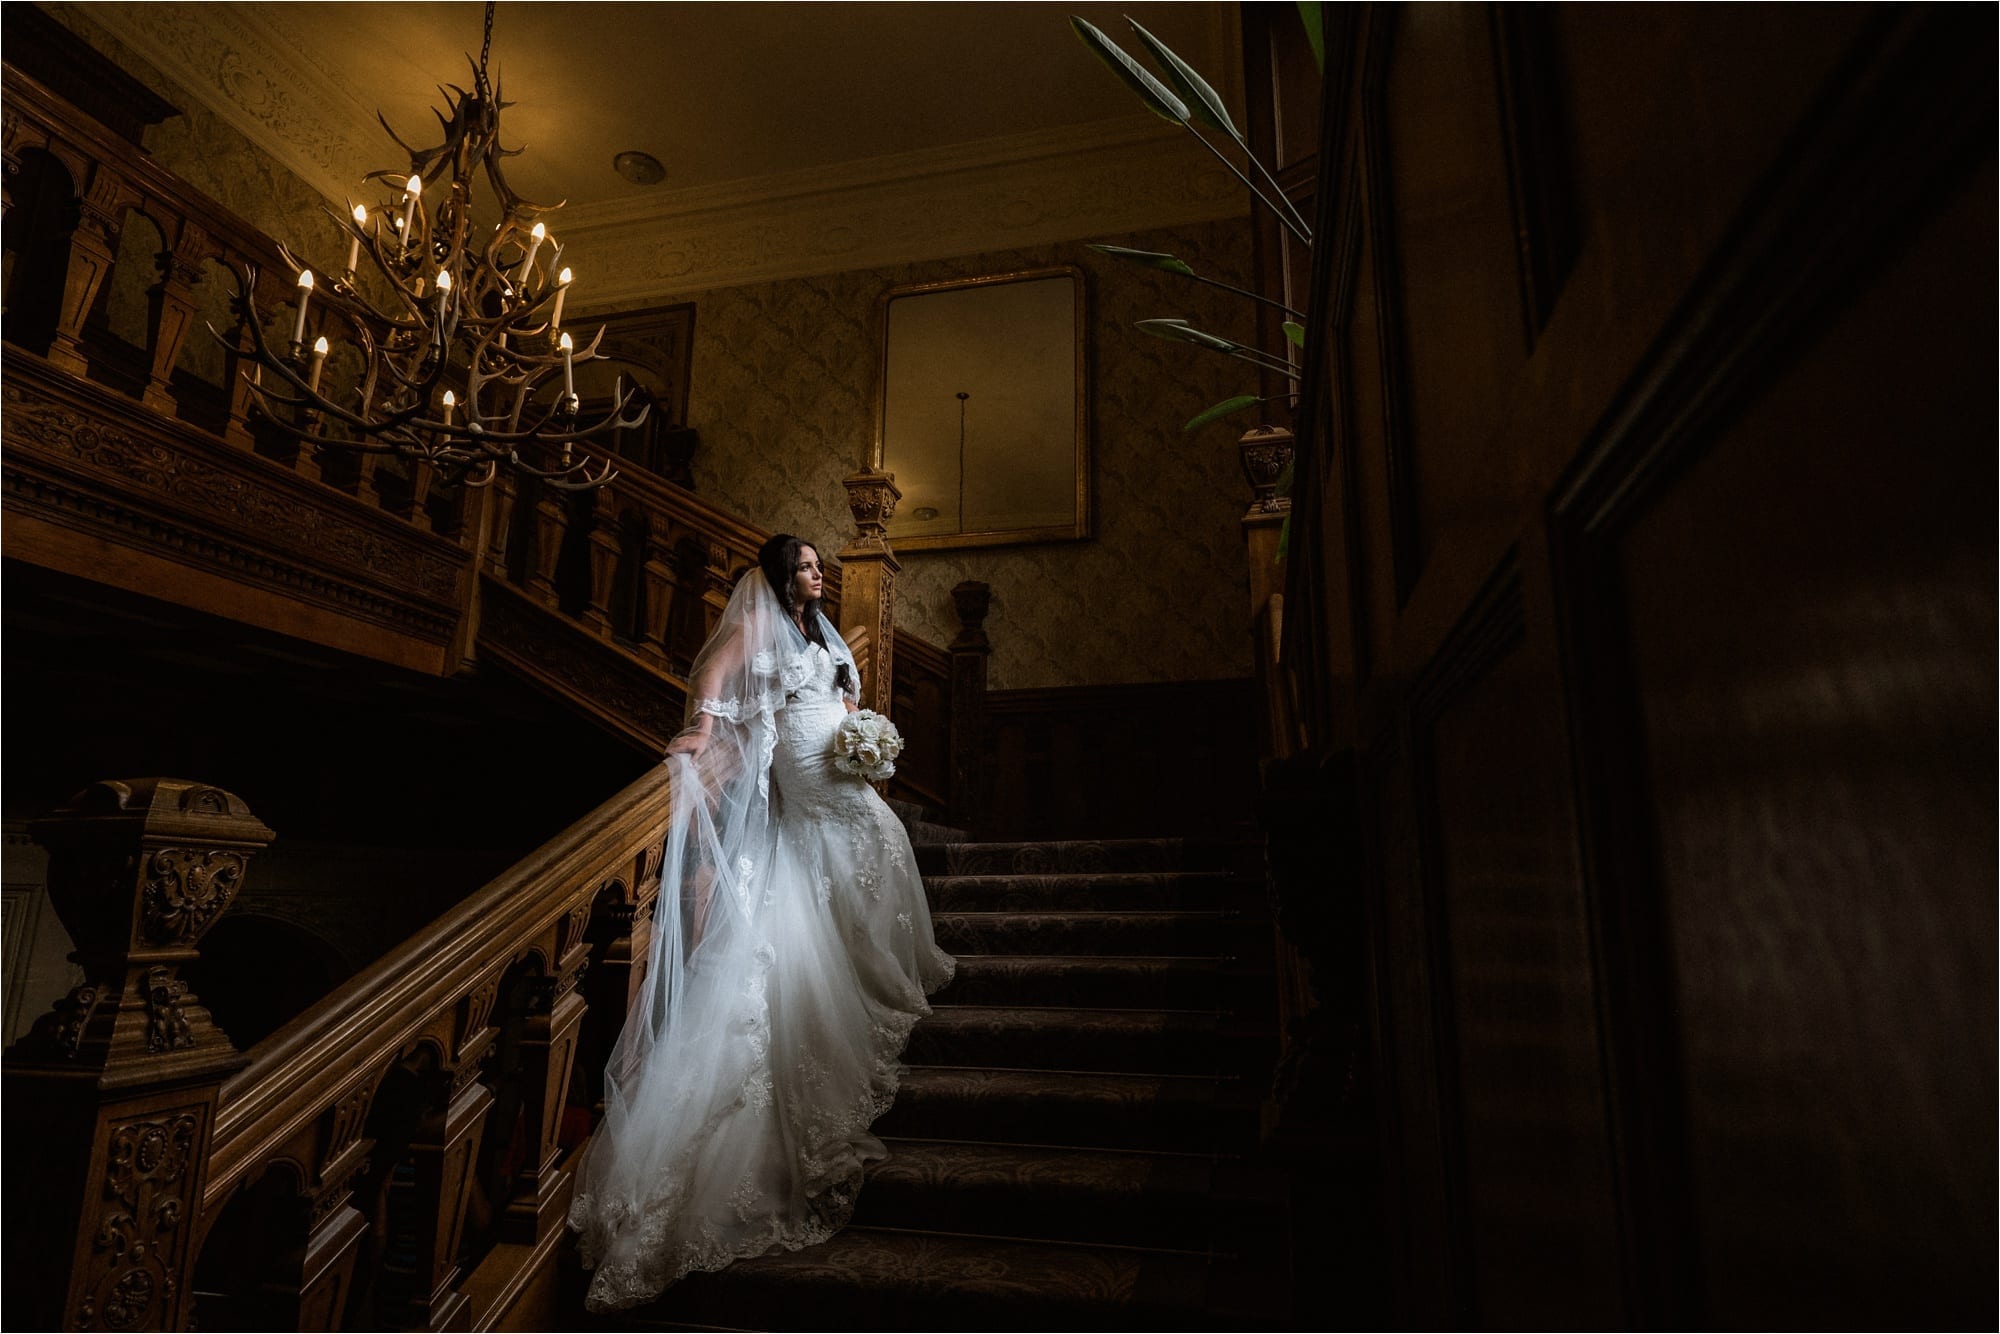 Wedding photography at bovey castle